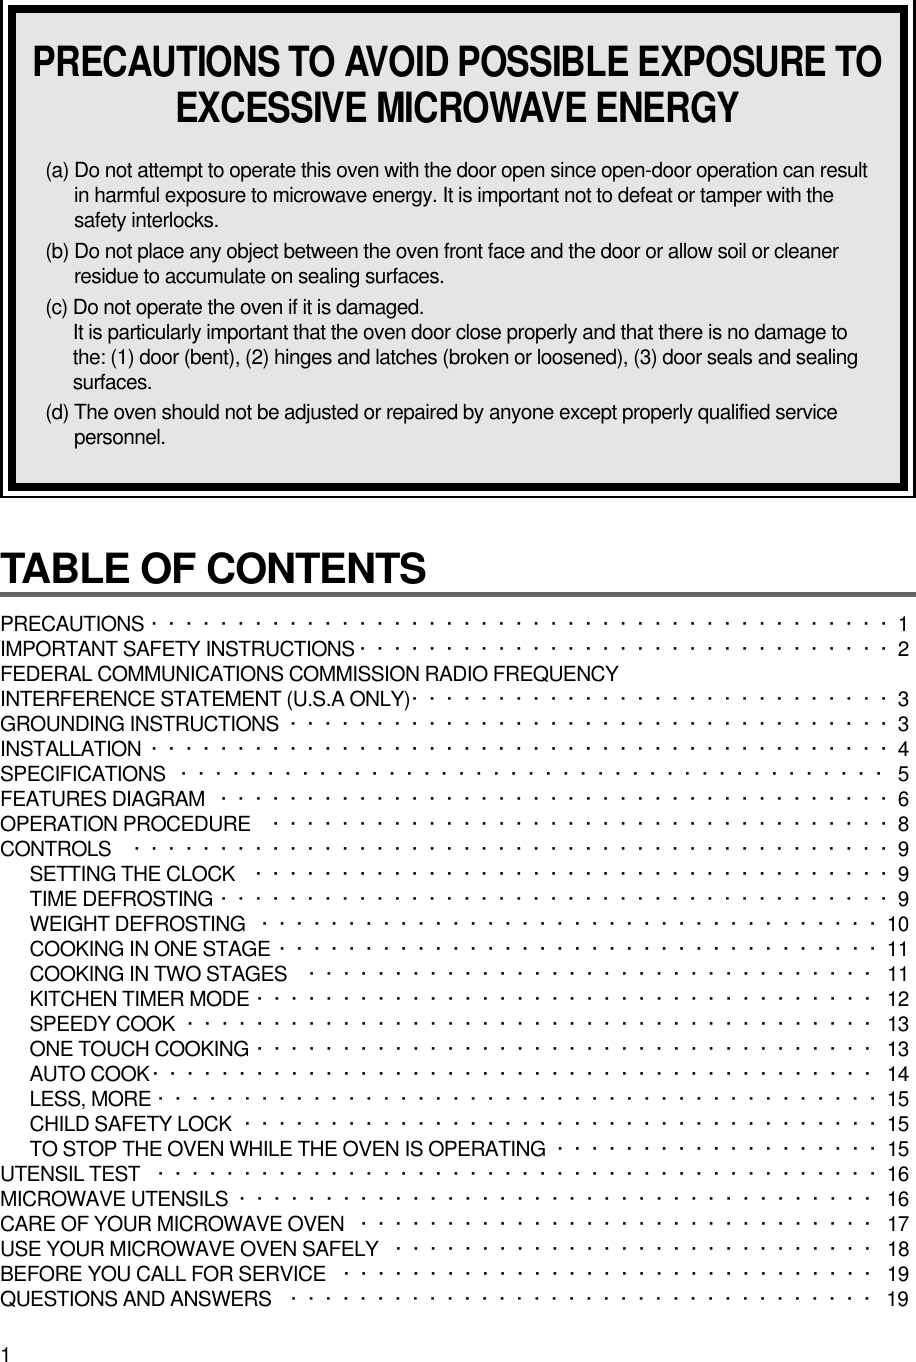 1TABLE OF CONTENTS PRECAUTIONS ···········································1 IMPORTANT SAFETY INSTRUCTIONS ·······························2FEDERAL COMMUNICATIONS COMMISSION RADIO FREQUENCY INTERFERENCE STATEMENT (U.S.A ONLY)····························3GROUNDING INSTRUCTIONS ···································3INSTALLATION ···········································4SPECIFICATIONS ········································· 5FEATURES DIAGRAM ·······································6OPERATION PROCEDURE ····································8CONTROLS ············································9SETTING THE CLOCK ·····································9TIME DEFROSTING ·······································9WEIGHT DEFROSTING ····································10COOKING IN ONE STAGE ···································11COOKING IN TWO STAGES ································· 11KITCHEN TIMER MODE ···································· 12SPEEDY COOK  ········································ 13ONE TOUCH COOKING ···································· 13AUTO COOK·········································· 14LESS, MORE ··········································15CHILD SAFETY LOCK ·····································15TO STOP THE OVEN WHILE THE OVEN IS OPERATING ···················15UTENSIL TEST ··········································16MICROWAVE UTENSILS  ····································· 16CARE OF YOUR MICROWAVE OVEN  ······························ 17USE YOUR MICROWAVE OVEN SAFELY  ···························· 18BEFORE YOU CALL FOR SERVICE ······························· 19QUESTIONS AND ANSWERS ·································· 19PRECAUTIONS TO AVOID POSSIBLE EXPOSURE TOEXCESSIVE MICROWAVE ENERGY(a) Do not attempt to operate this oven with the door open since open-door operation can resultin harmful exposure to microwave energy. It is important not to defeat or tamper with thesafety interlocks.(b) Do not place any object between the oven front face and the door or allow soil or cleanerresidue to accumulate on sealing surfaces.(c) Do not operate the oven if it is damaged.It is particularly important that the oven door close properly and that there is no damage tothe: (1) door (bent), (2) hinges and latches (broken or loosened), (3) door seals and sealingsurfaces.(d) The oven should not be adjusted or repaired by anyone except properly qualified servicepersonnel.